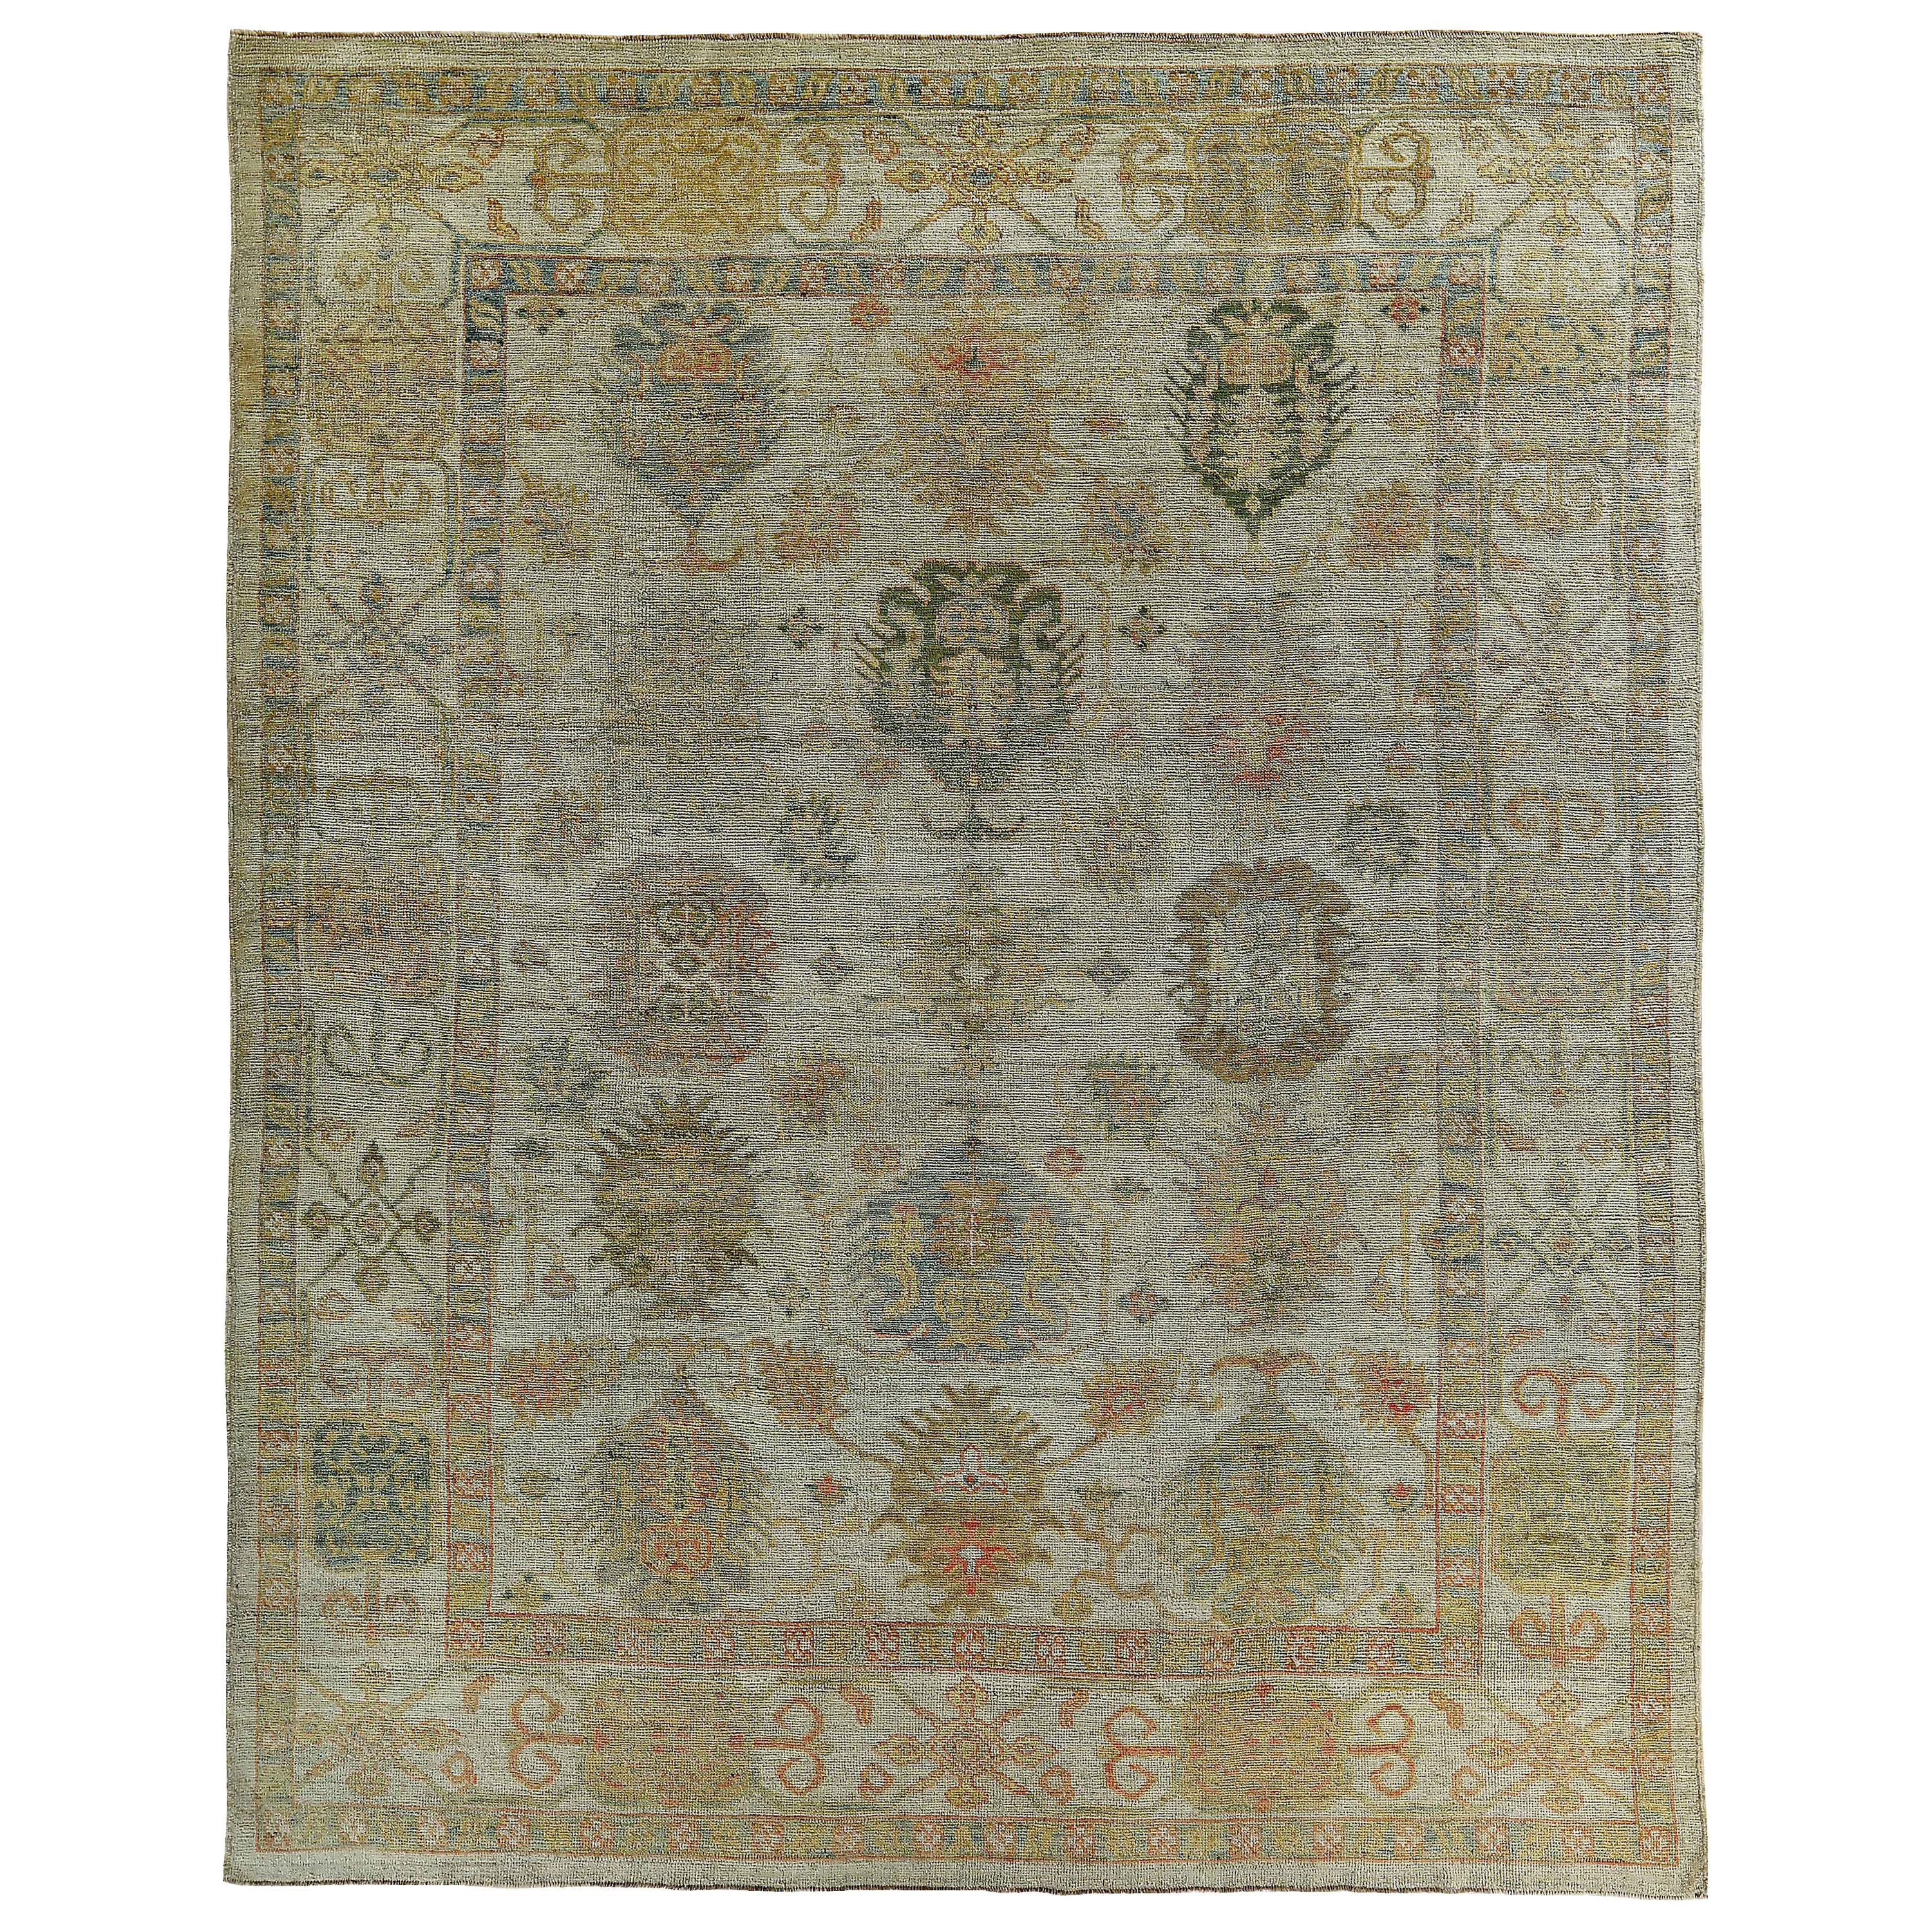 New Turkish Oushak Rug with Green and Gray Flower Head Details on Ivory Field